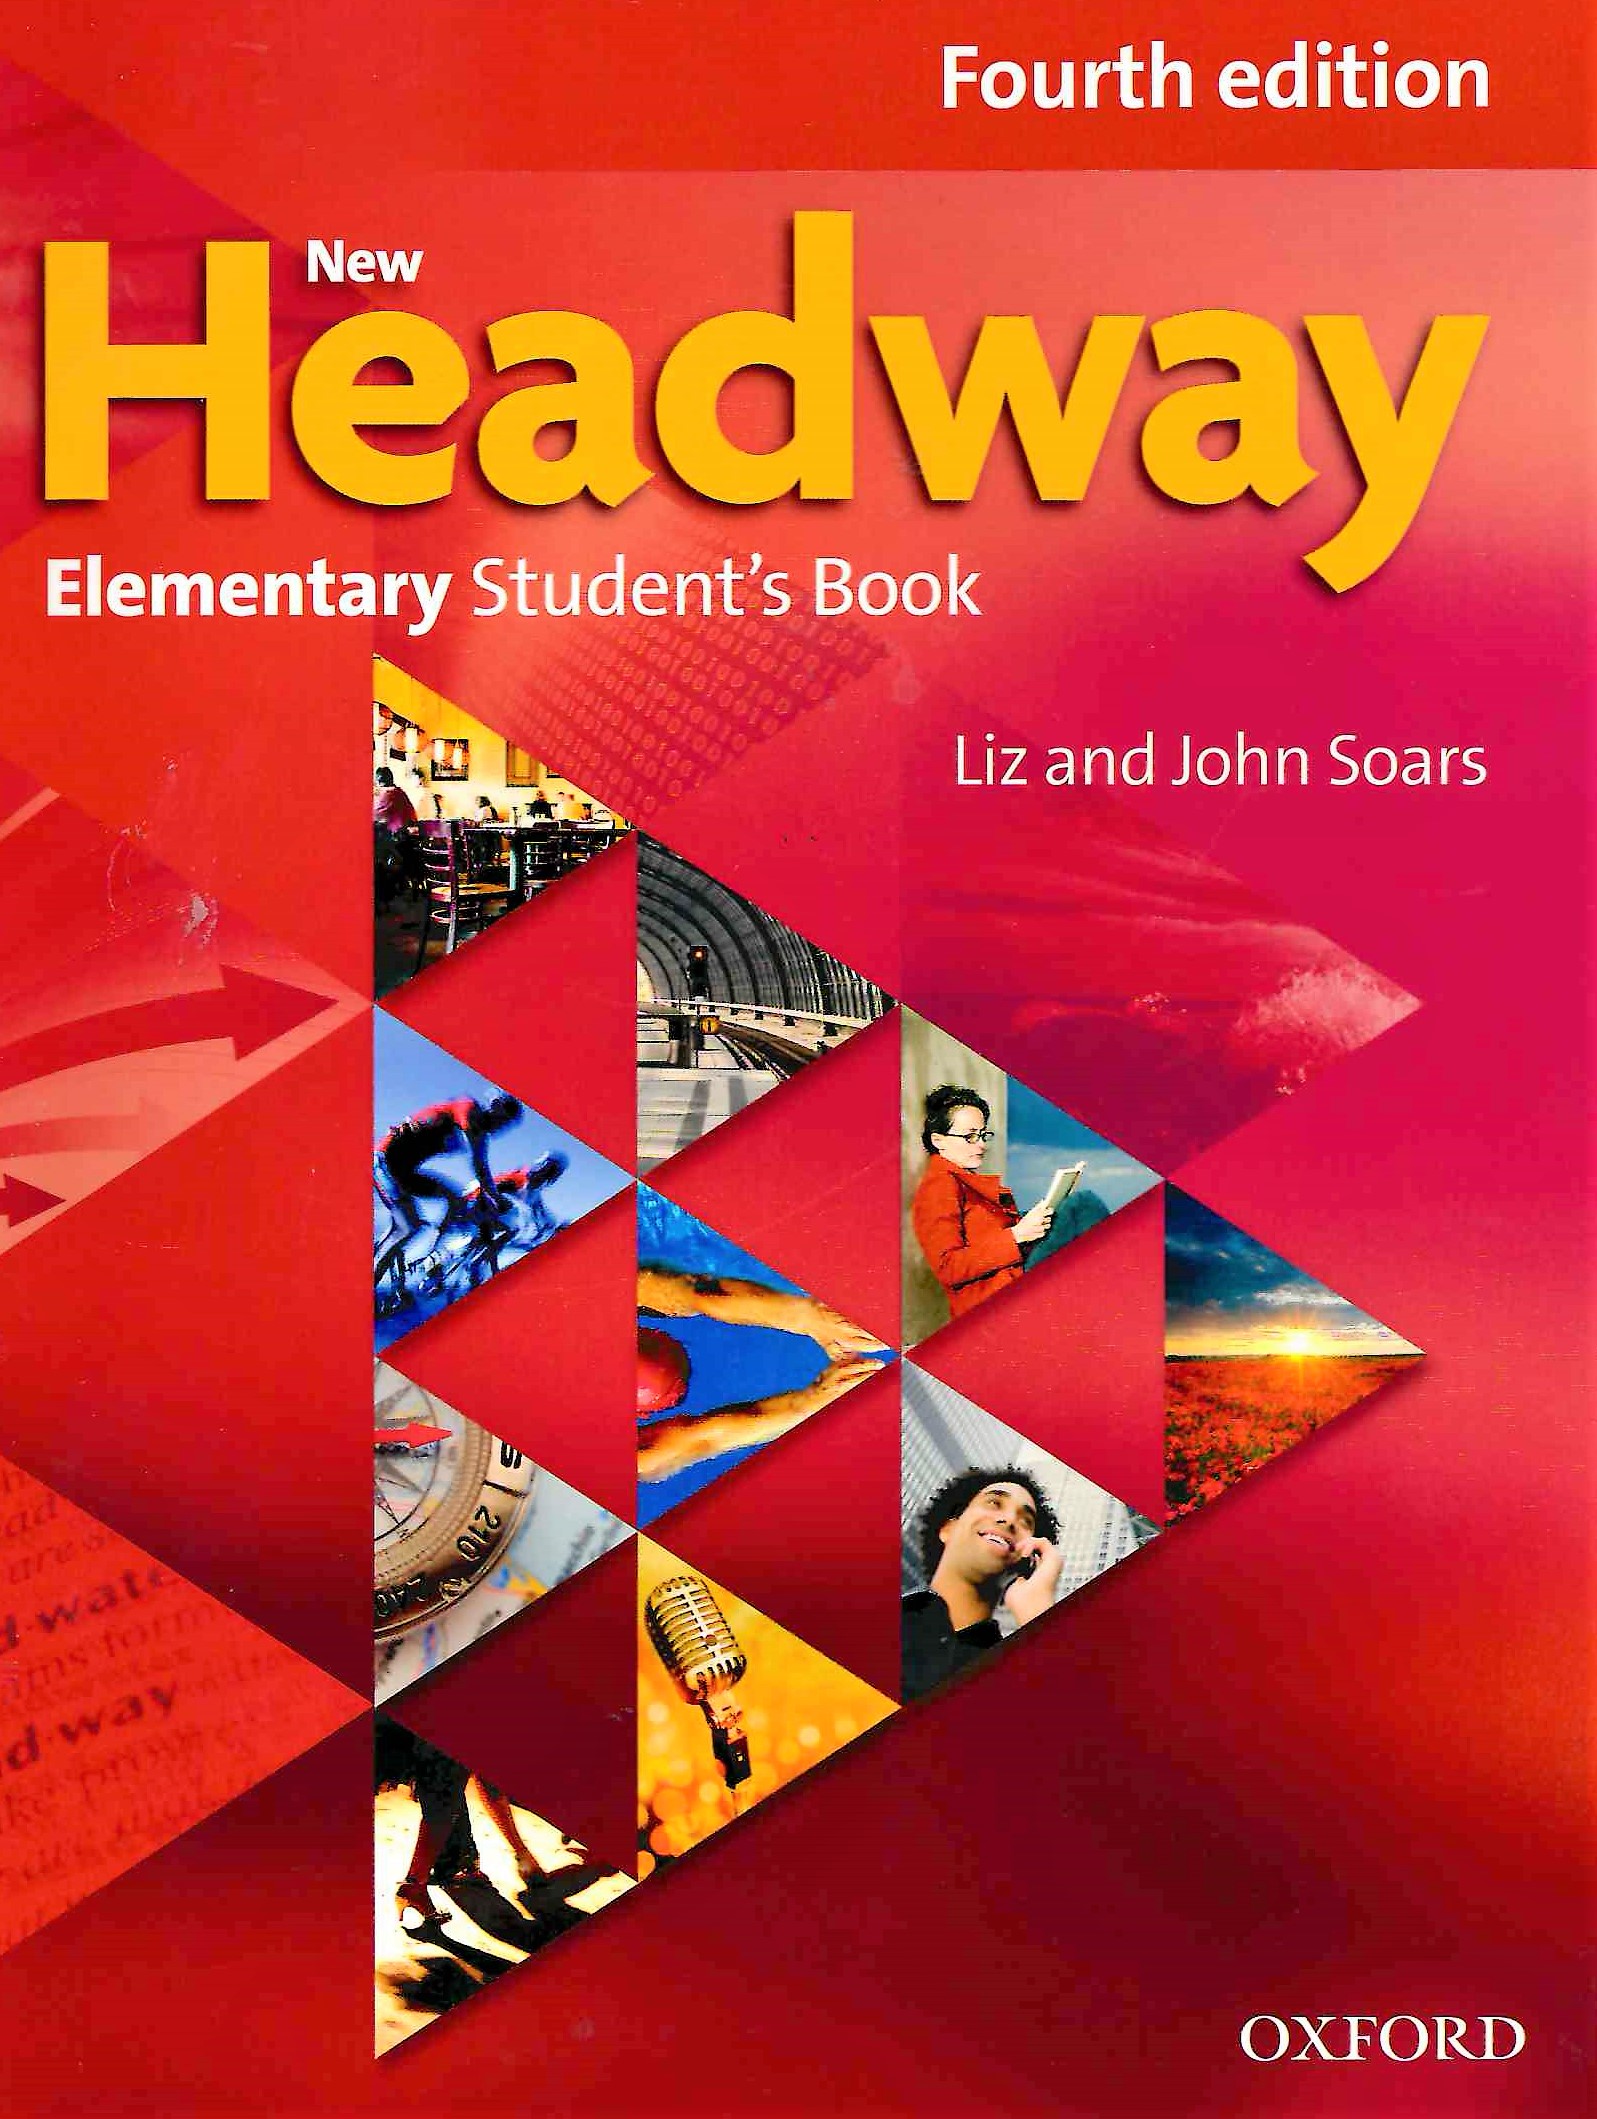 Oxford student s book. New Headway Elementary 3rd Edition. New Headway Beginner 4th Edition. New Headway Elementary Audio 4th Edition. Headway Elementary 4th Edition.